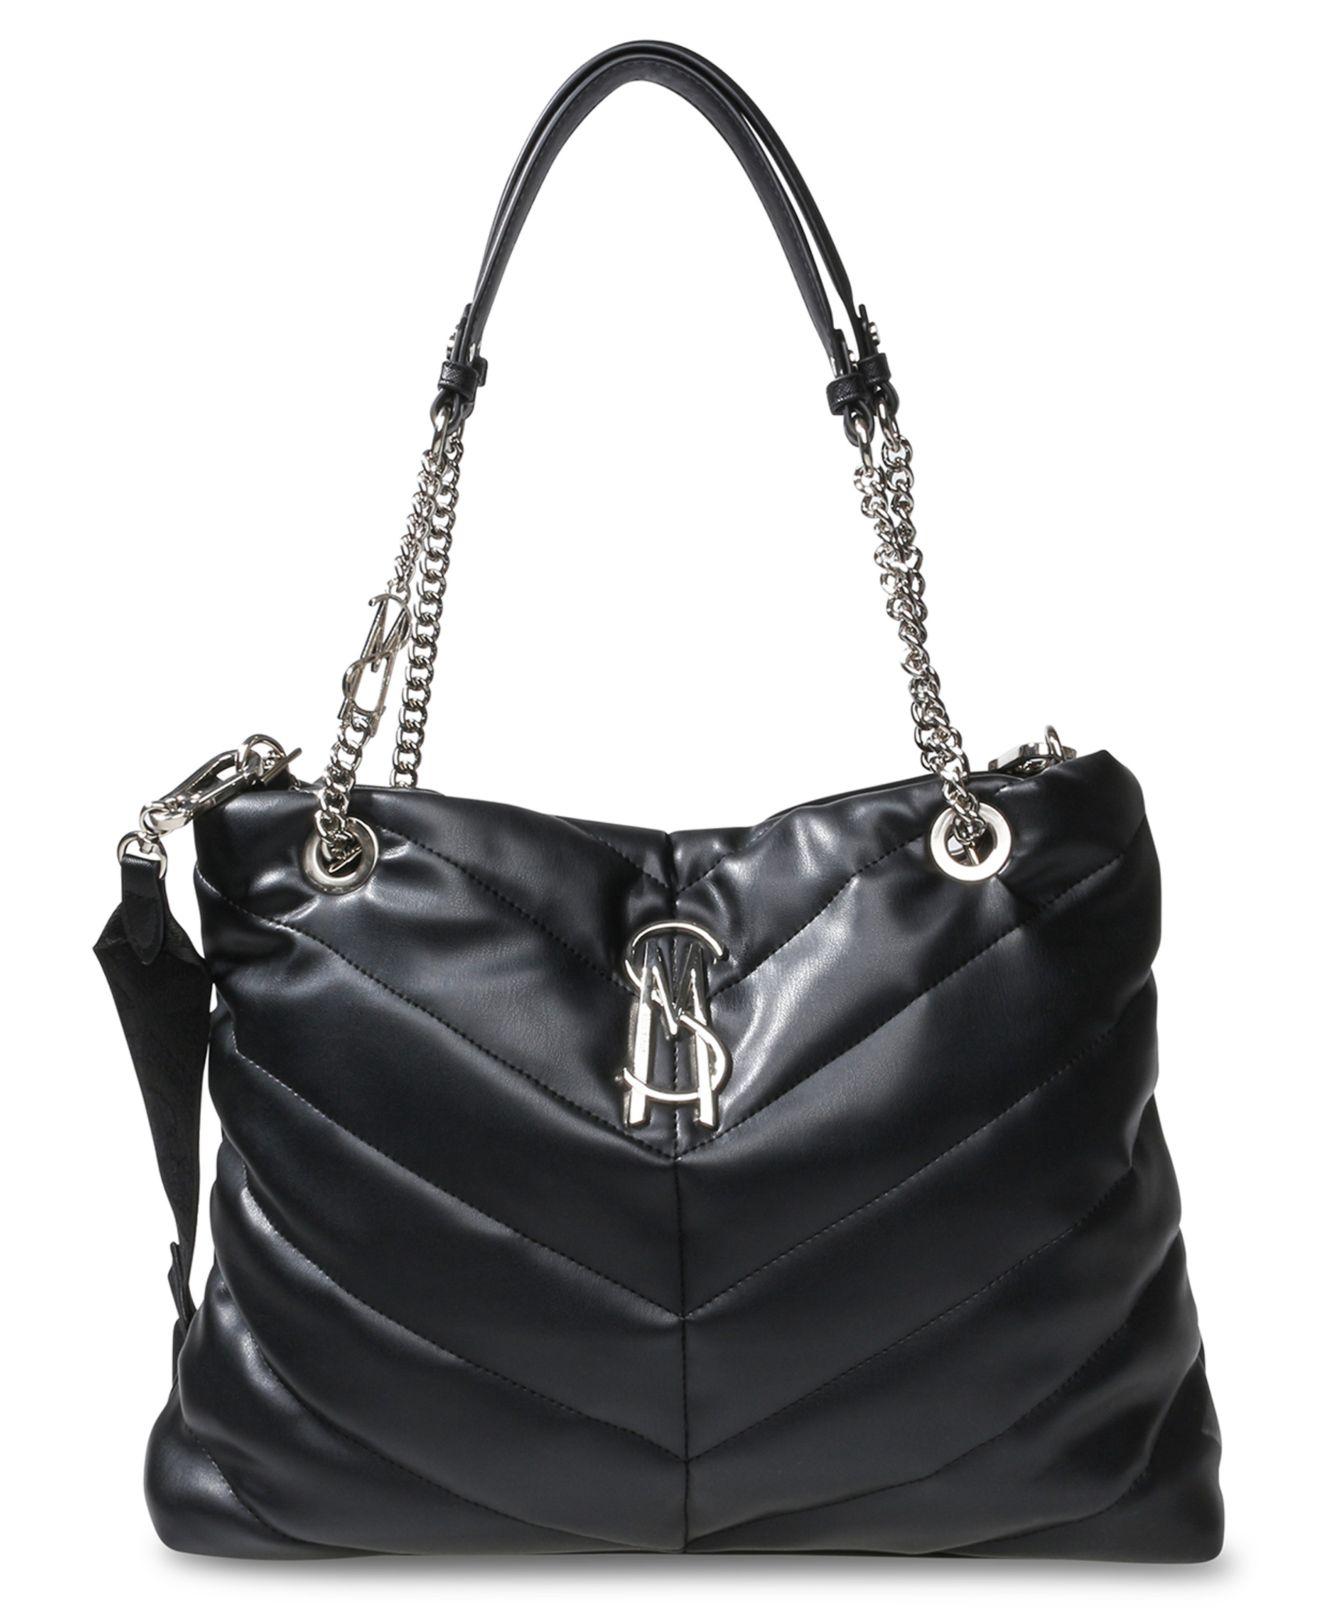 Steve Madden Bcameo-P patent tote bag in chocolate